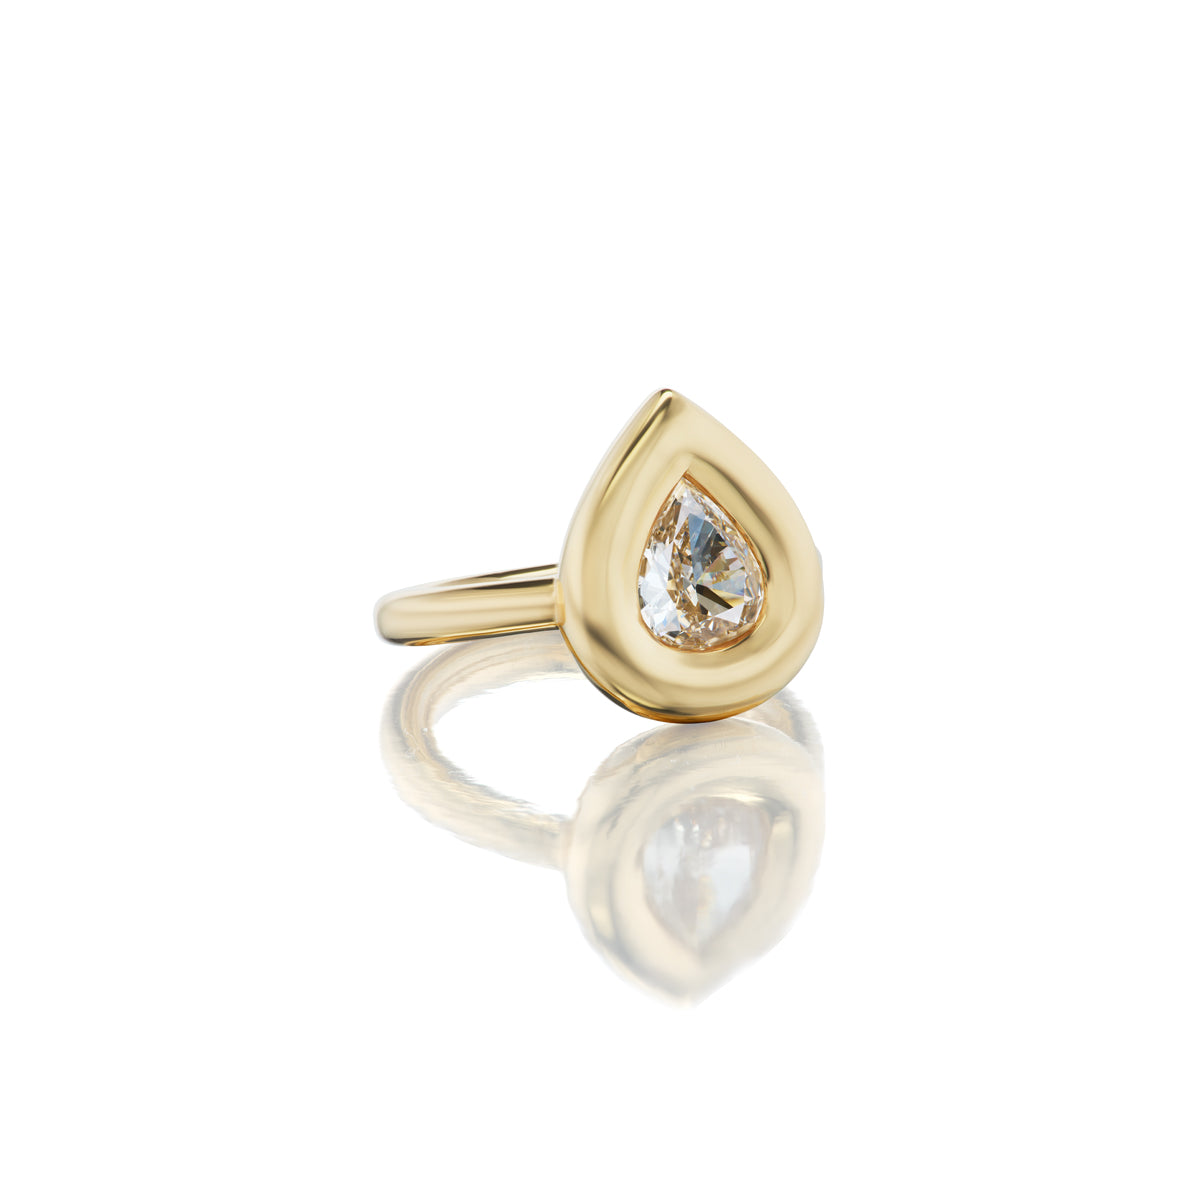 THE CURVE RING // PEAR